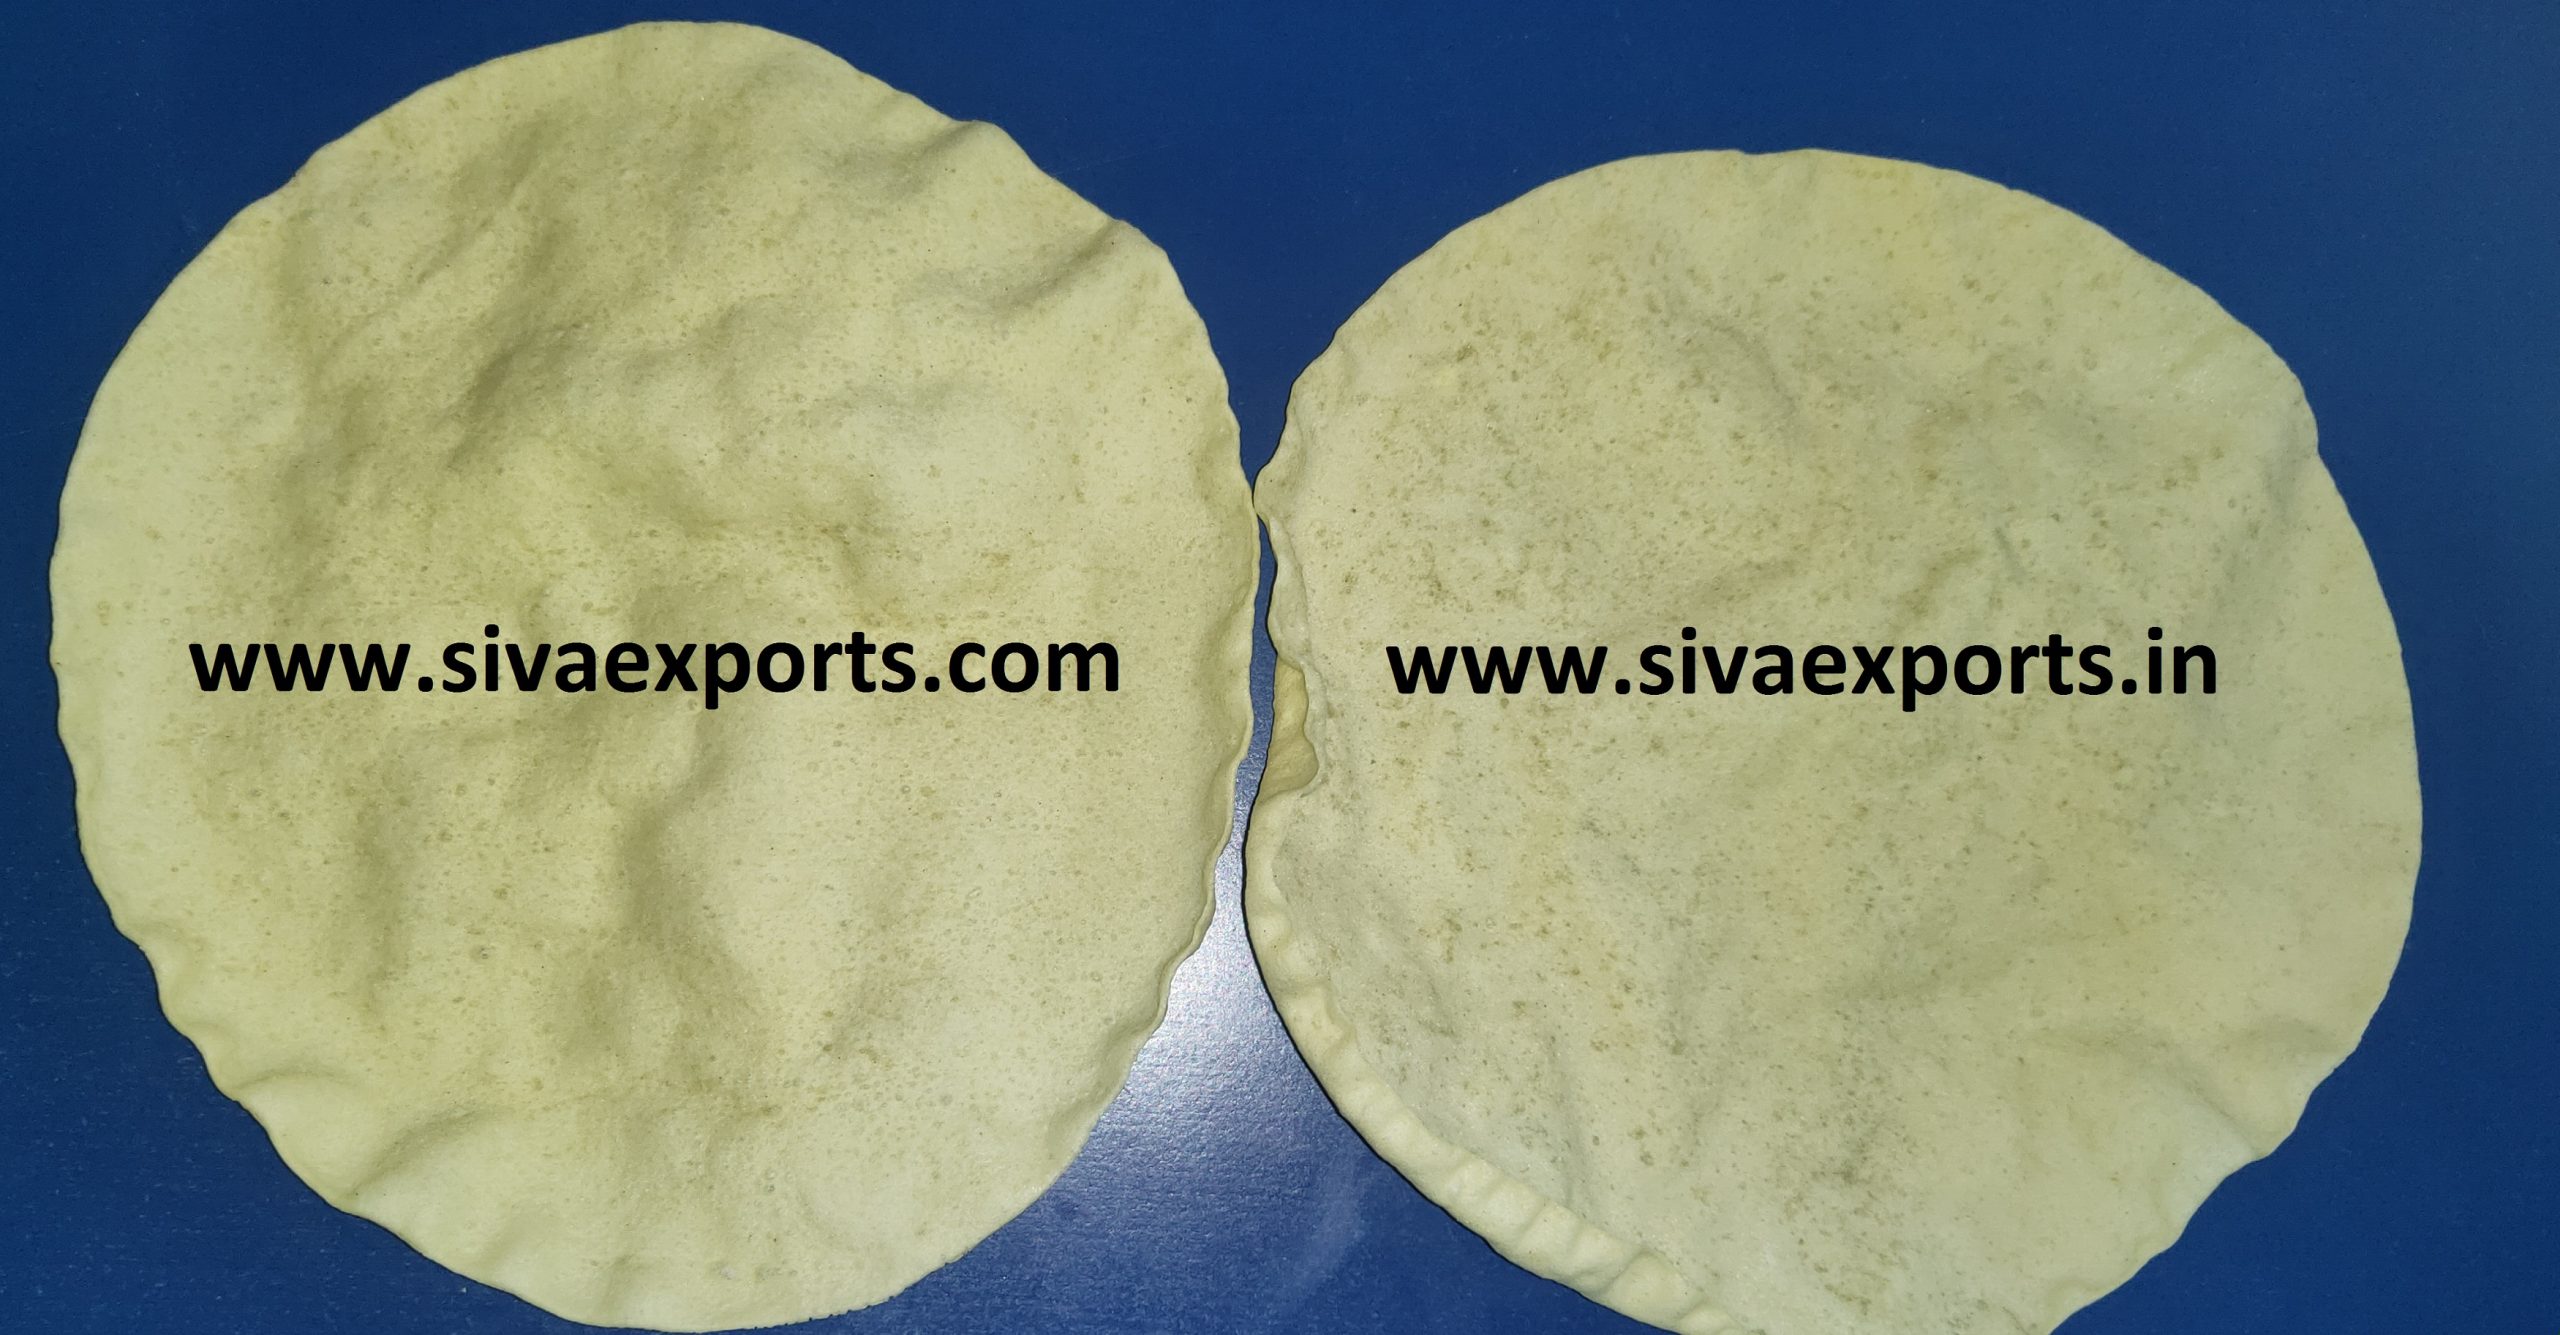 appalam manufacturers in india, papad manufacturers in india, appalam manufacturers in tamilnadu, papad manufacturers in tamilnadu, appalam manufacturers in madurai, papad manufacturers in madurai, appalam exporters in india, papad exporters in india, appalam exporters in tamilnadu, papad exporters in tamilnadu, appalam exporters in madurai, papad exporters in madurai, appalam wholesalers in india, papad wholesalers in india, appalam wholesalers in tamilnadu, papad wholesalers in tamilnadu, appalam wholesalers in madurai, papad wholesalers in madurai, appalam distributors in india, papad distributors in india, appalam distributors in tamilnadu, papad distributors in tamilnadu, appalam distributors in madurai, papad distributors in madurai, appalam suppliers in india, papad suppliers in india, appalam suppliers in tamilnadu, papad suppliers in tamilnadu, appalam suppliers in madurai, papad suppliers in madurai, appalam dealers in india, papad dealers in india, appalam dealers in tamilnadu, papad dealers in tamilnadu, appalam dealers in madurai, papad dealers in madurai, appalam companies in india, appalam companies in tamilnadu, appalam companies in madurai, papad companies in india, papad companies in tamilnadu, papad companies in madurai, appalam company in india, appalam company in tamilnadu, appalam company in madurai, papad company in india, papad company in tamilnadu, papad company in madurai, appalam factory in india, appalam factory in tamilnadu, appalam factory in madurai, papad factory in india, papad factory in tamilnadu, papad factory in madurai, appalam factories in india, appalam factories in tamilnadu, appalam factories in madurai, papad factories in india, papad factories in tamilnadu, papad factories in madurai, appalam production units in india, appalam production units in tamilnadu, appalam production units in madurai, papad production units in india, papad production units in tamilnadu, papad production units in madurai, pappadam manufacturers in india, poppadom manufacturers in india, pappadam manufacturers in tamilnadu, poppadom manufacturers in tamilnadu, pappadam manufacturers in madurai, poppadom manufacturers in madurai, appalam manufacturers, papad manufacturers, pappadam manufacturers, pappadum exporters in india, pappadam exporters in india, poppadom exporters in india, pappadam exporters in tamilnadu, pappadum exporters in tamilnadu, poppadom exporters in tamilnadu, pappadum exporters in madurai, pappadam exporters in madurai, poppadom exporters in Madurai, pappadum wholesalers in madurai, pappadam wholesalers in madurai, poppadom wholesalers in Madurai, pappadum wholesalers in tamilnadu, pappadam wholesalers in tamilnadu, poppadom wholesalers in Tamilnadu, pappadam wholesalers in india, poppadom wholesalers in india, pappadum wholesalers in india, appalam retailers in india, papad retailers in india, appalam retailers in tamilnadu, papad retailers in tamilnadu, appalam retailers in madurai, papad retailers in madurai, appalam, papad, Siva Exports, Orange Appalam, Orange Papad, Lion Brand Appalam, Siva Appalam, Lion brand Papad, Sivan Appalam, Orange Pappadam, appalam, papad, papadum, papadam, papadom, pappad, pappadum, pappadam, pappadom, poppadom, popadom, poppadam, popadam, poppadum, popadum, appalam manufacturers, papad manufacturers, papadum manufacturers, papadam manufacturers, pappadam manufacturers, pappad manufacturers, pappadum manufacturers, pappadom manufacturers, poppadom manufacturers, papadom manufacturers, popadom manufacturers, poppadum manufacturers, popadum manufacturers, popadam manufacturers, poppadam manufacturers, cumin appalam, red chilli appalam, green chilli appalam, pepper appalam, garmic appalam, calcium appalam, plain appalam manufacturers in india,tamilnadu,madurai plain appalam manufacturers in india, cumin appalam manufacturers in india, pepper appalam manufacturers in india, red chilli appalam manufacturers in india,, green chilli appalam manufacturers in india, garlic appalam manufacturers in india, calcium appalam manufacturers in india, plain Papad manufacturers in india, cumin Papad manufacturers in india, pepper Papad manufacturers in india, red chilli Papad manufacturers in india,, green chilli Papad manufacturers in india, garlic Papad manufacturers in india, calcium Papad manufacturers in india, plain appalam manufacturers in Tamilnadu, cumin appalam manufacturers in Tamilnadu, pepper appalam manufacturers in Tamilnadu, red chilli appalam manufacturers in Tamilnadu, green chilli appalam manufacturers in Tamilnadu, garlic appalam manufacturers in Tamilnadu, calcium appalam manufacturers in Tamilnadu, plain Papad manufacturers in Tamilnadu, cumin Papad manufacturers in Tamilnadu, pepper Papad manufacturers in Tamilnadu, red chilli Papad manufacturers in Tamilnadu,, green chilli Papad manufacturers in Tamilnadu, garlic Papad manufacturers in Tamilnadu, calcium Papad manufacturers in Tamilnadu, plain appalam manufacturers in madurai, cumin appalam manufacturers in madurai, pepper appalam manufacturers in madurai, red chilli appalam manufacturers in madurai, green chilli appalam manufacturers in madurai, garlic appalam manufacturers in madurai, calcium appalam manufacturers in madurai, plain Papad manufacturers in madurai, cumin Papad manufacturers in madurai, pepper Papad manufacturers in madurai, red chilli Papad manufacturers in madurai,, green chilli Papad manufacturers in madurai, garlic Papad manufacturers in madurai, calcium Papad manufacturers in madurai, appalam manufacturers, papad manufacturers, pappadam manufacturers, papadum manufacturers, papadam manufacturers, pappad manufacturers, pappadum manufacturers, poppadom manufacturers, papadom manufacturers, popadom manufacturers, poppadum manufacturers, popadum manufacturers, popadam manufacturers, poppadam manufacturers, pappadom manufacturers, appalam manufacturers in india, papad manufacturers in india, pappadam manufacturers in india, papadum manufacturers in india, papadam manufacturers in india, pappad manufacturers in india, pappadum manufacturers in india, poppadom manufacturers in india, papadom manufacturers in india, popadom manufacturers in india, poppadum manufacturers in india, popadum manufacturers in india, popadam manufacturers in india, poppadam manufacturers in india, pappadom manufacturers in india, appalam manufacturers in tamilnadu, papad manufacturers in tamilnadu, pappadam manufacturers in tamilnadu, papadum manufacturers in tamilnadu, papadam manufacturers in tamilnadu, pappad manufacturers in tamilnadu, pappadum manufacturers in tamilnadu, poppadom manufacturers in tamilnadu, papadom manufacturers in tamilnadu, popadom manufacturers in tamilnadu, poppadum manufacturers in tamilnadu, popadum manufacturers in tamilnadu, popadam manufacturers in tamilnadu, poppadam manufacturers in tamilnadu, pappadom manufacturers in tamilnadu, appalam manufacturers in madurai, papad manufacturers in madurai, pappadam manufacturers in madurai, papadum manufacturers in madurai, papadam manufacturers in madurai, pappad manufacturers in madurai, pappadum manufacturers in madurai, poppadom manufacturers in madurai, papadom manufacturers in madurai, popadom manufacturers in madurai, poppadum manufacturers in madurai, popadum manufacturers in madurai, popadam manufacturers in madurai, poppadam manufacturers in madurai, pappadom manufacturers in madurai, Appalam Manufacturers in Tirunelveli, Appalam Manufacturers in nellai